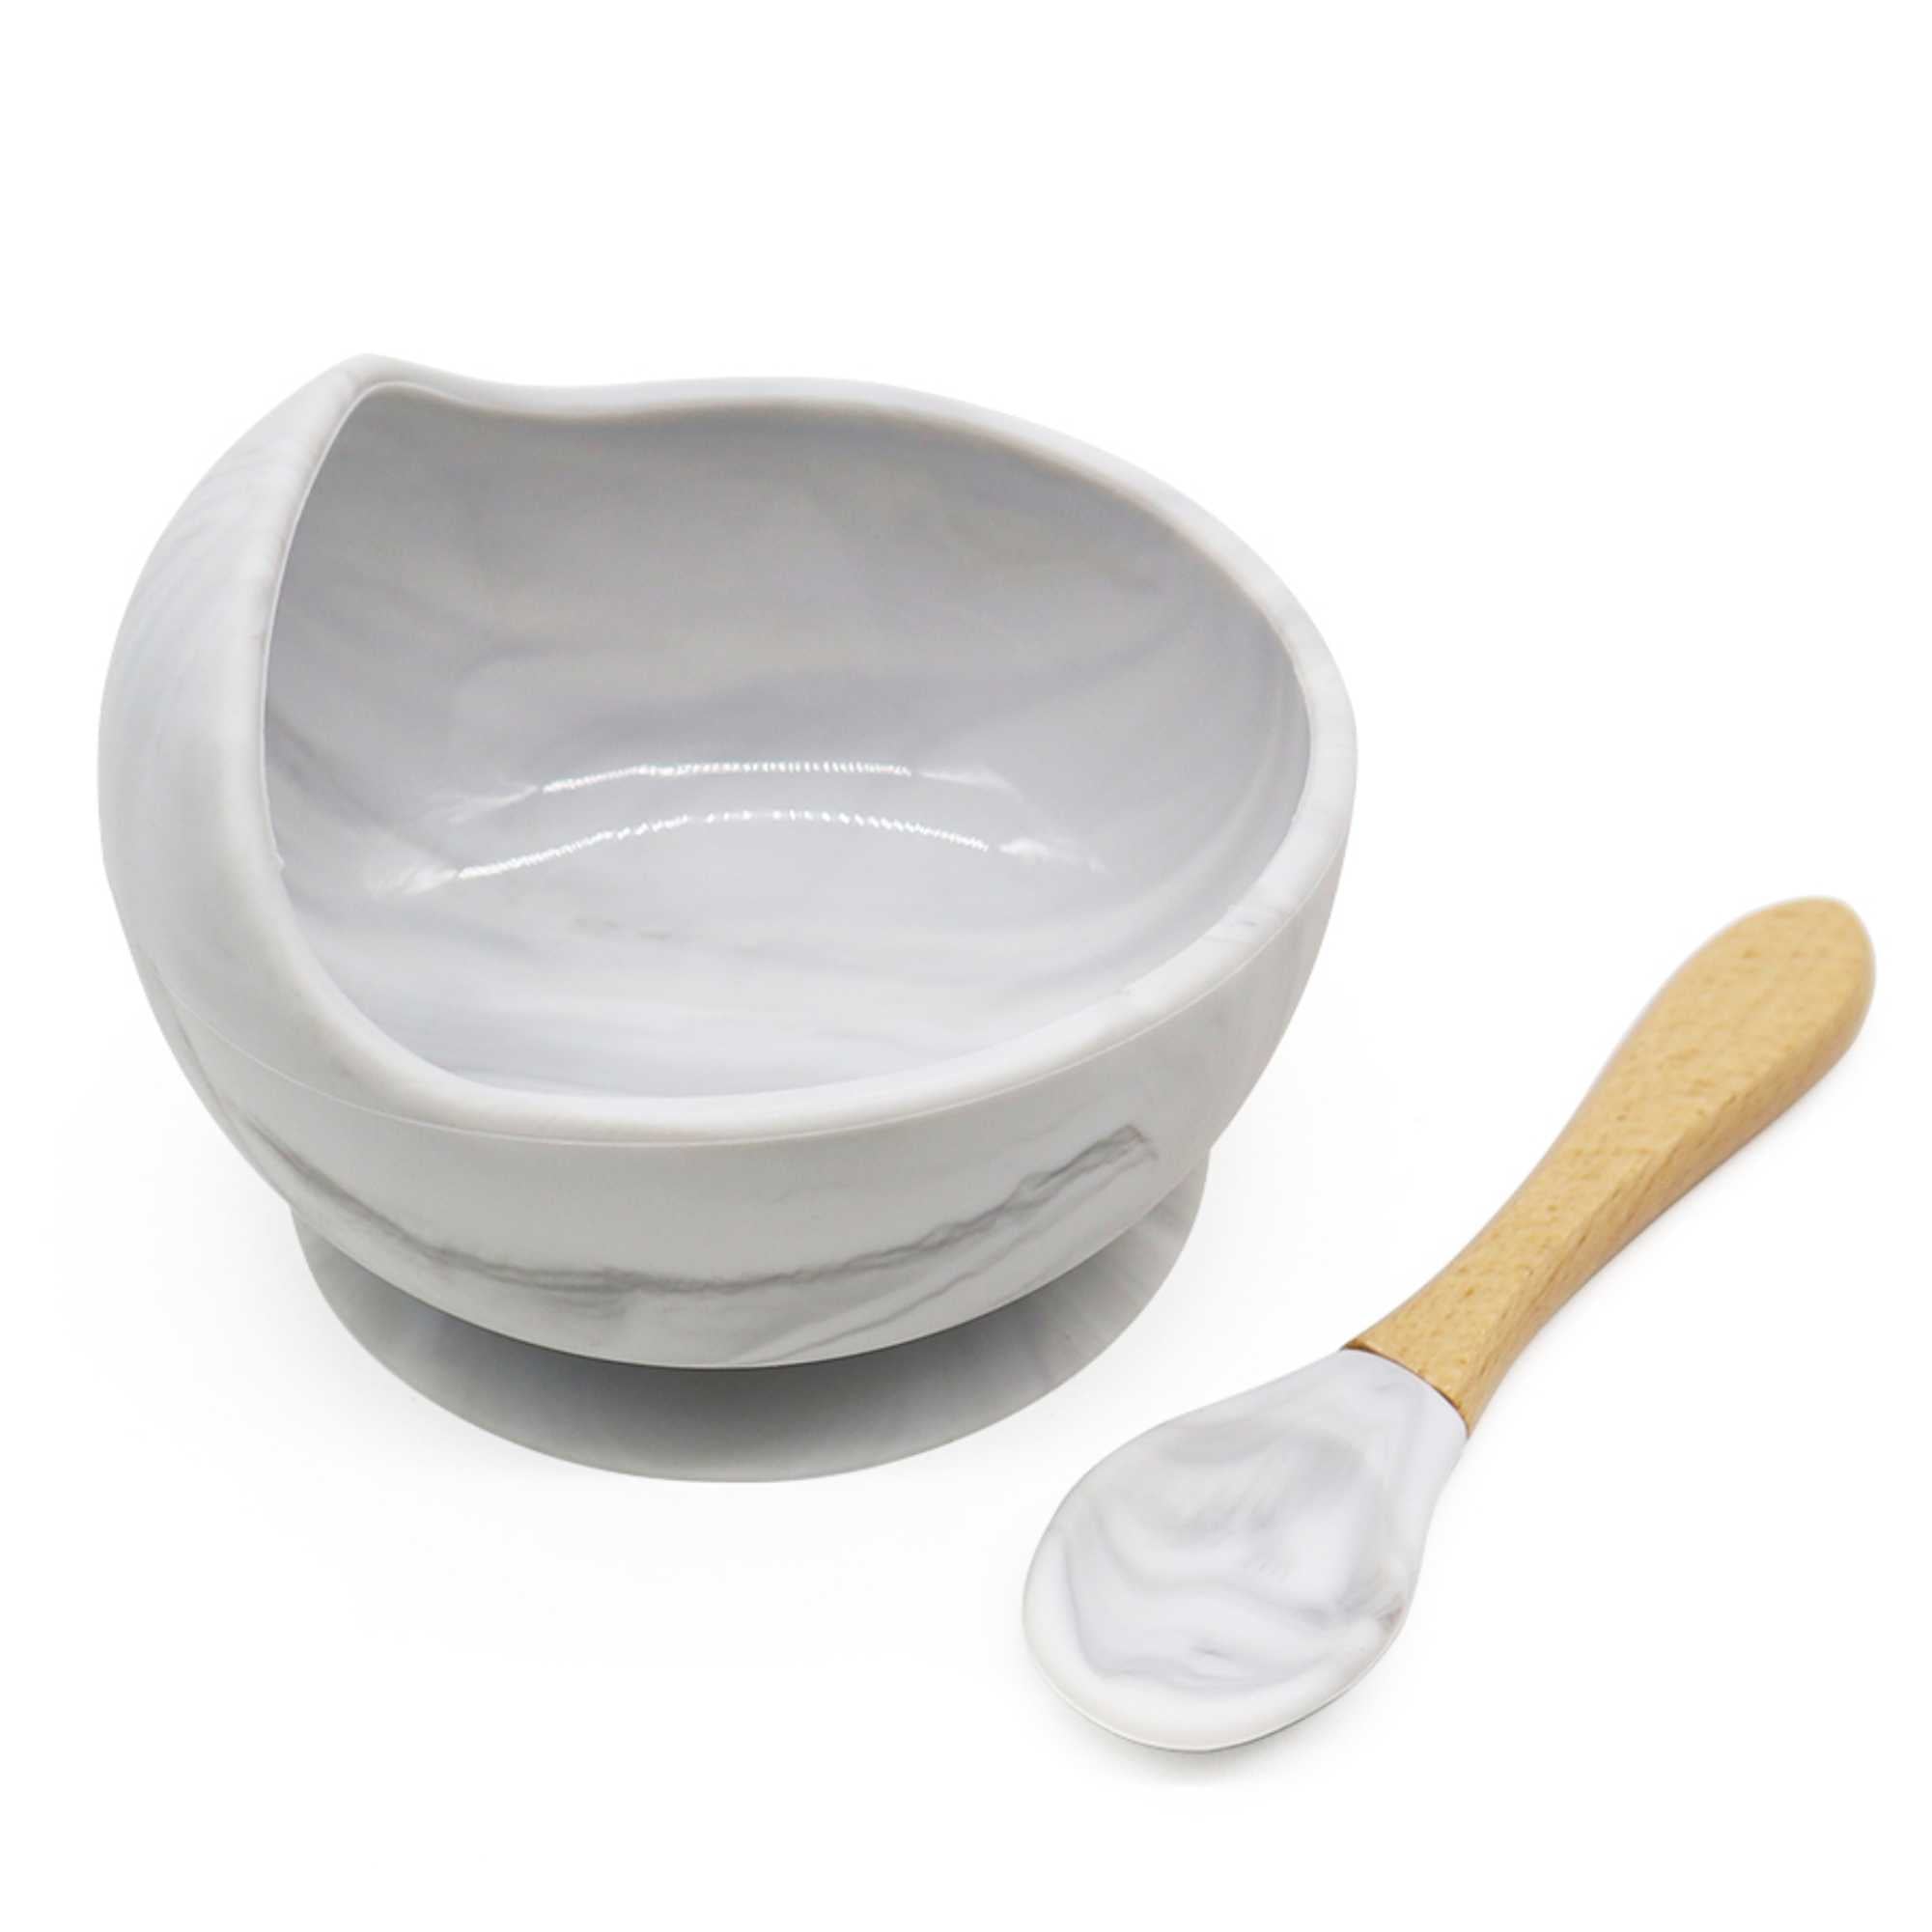 Magic Stay-put Baby Bowl & Spoon Set in Brilliant Gray